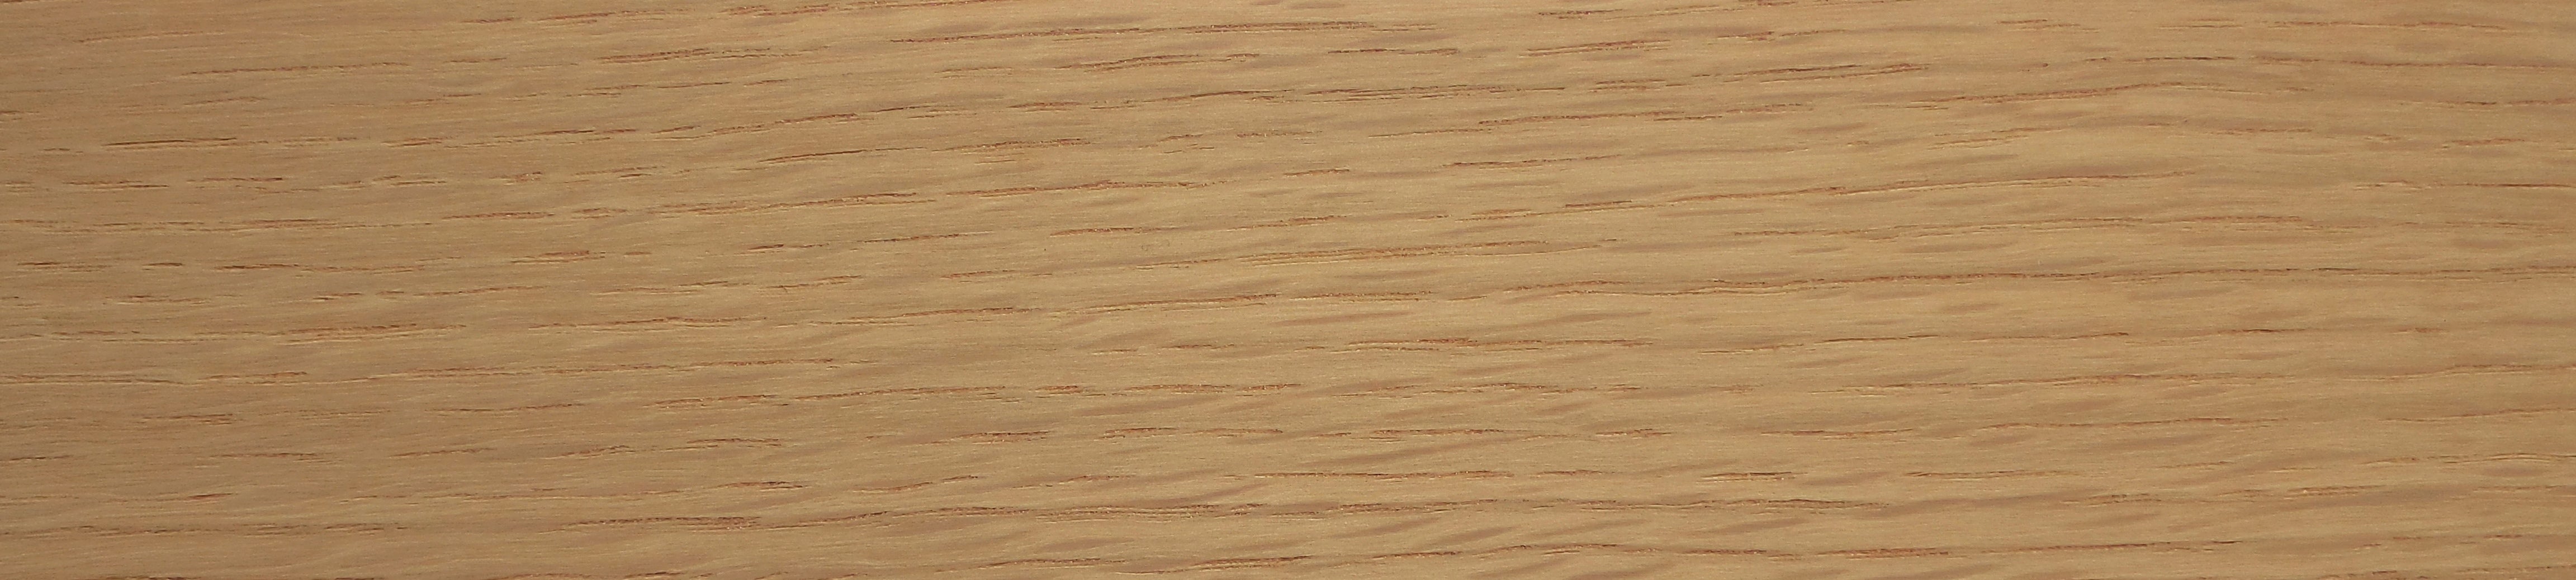 American White Oak Thickwood Unglued Edging / Lipping 30mm x 1mm Thick Oak Wood Edging